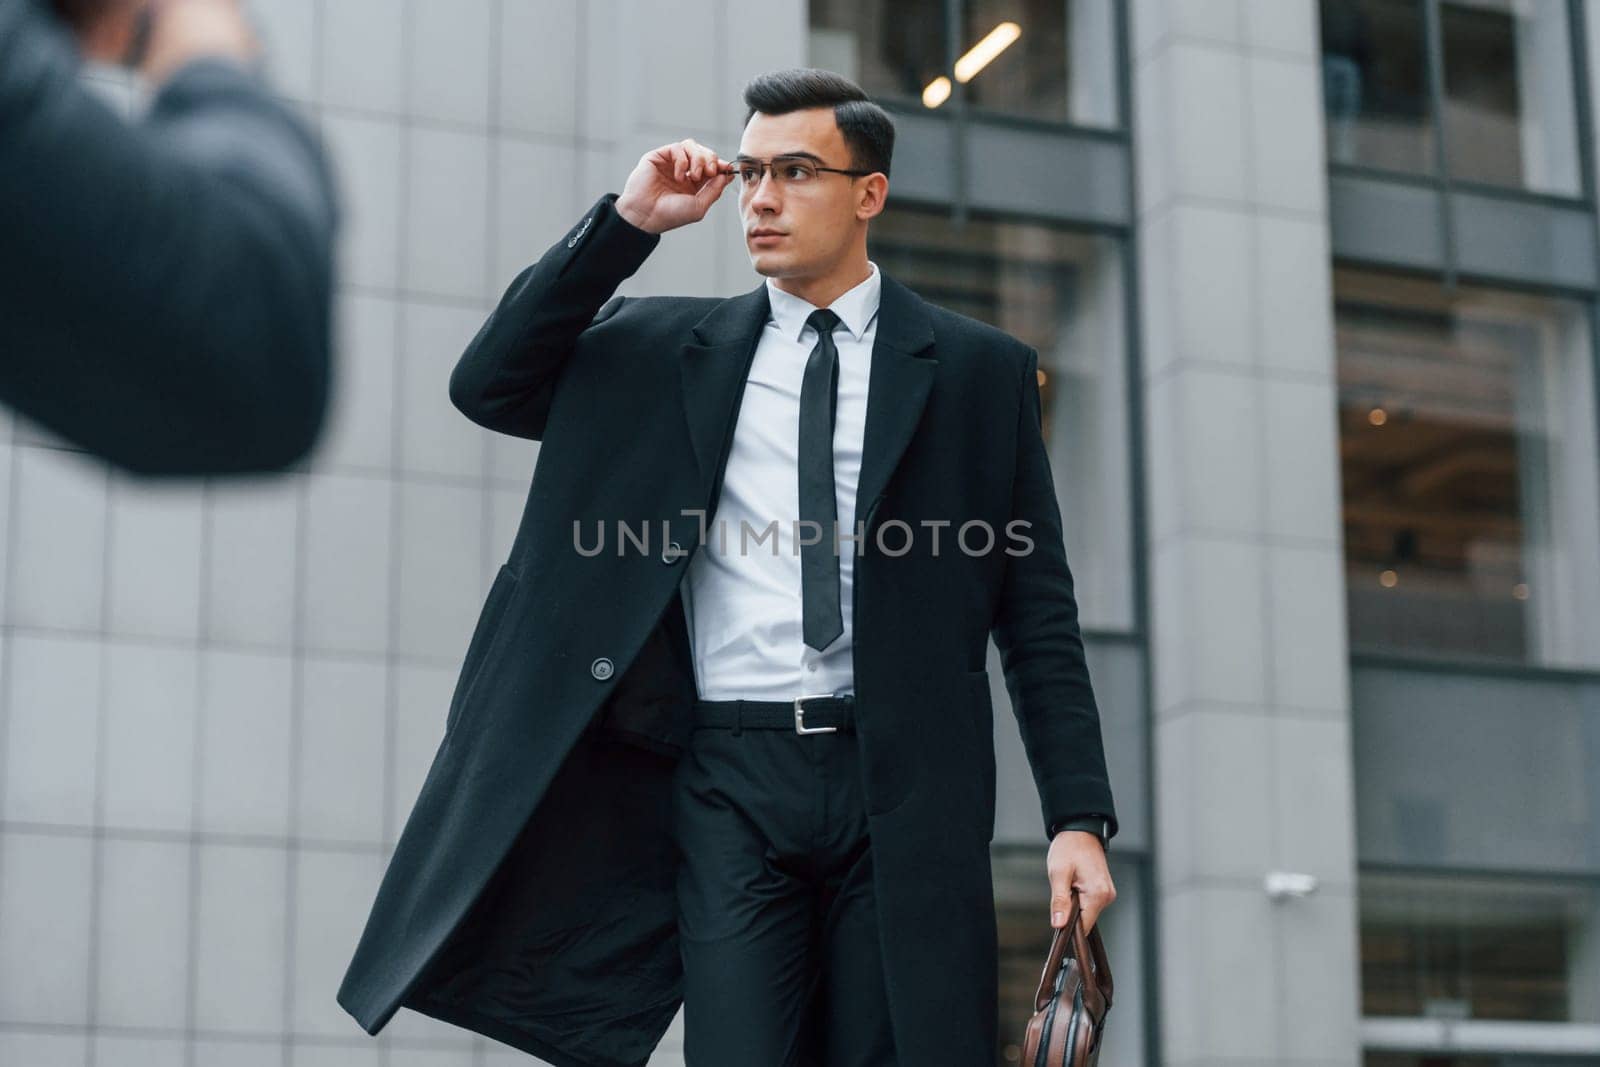 Posing for photographer. Businessman in black suit and tie is outdoors in the city.